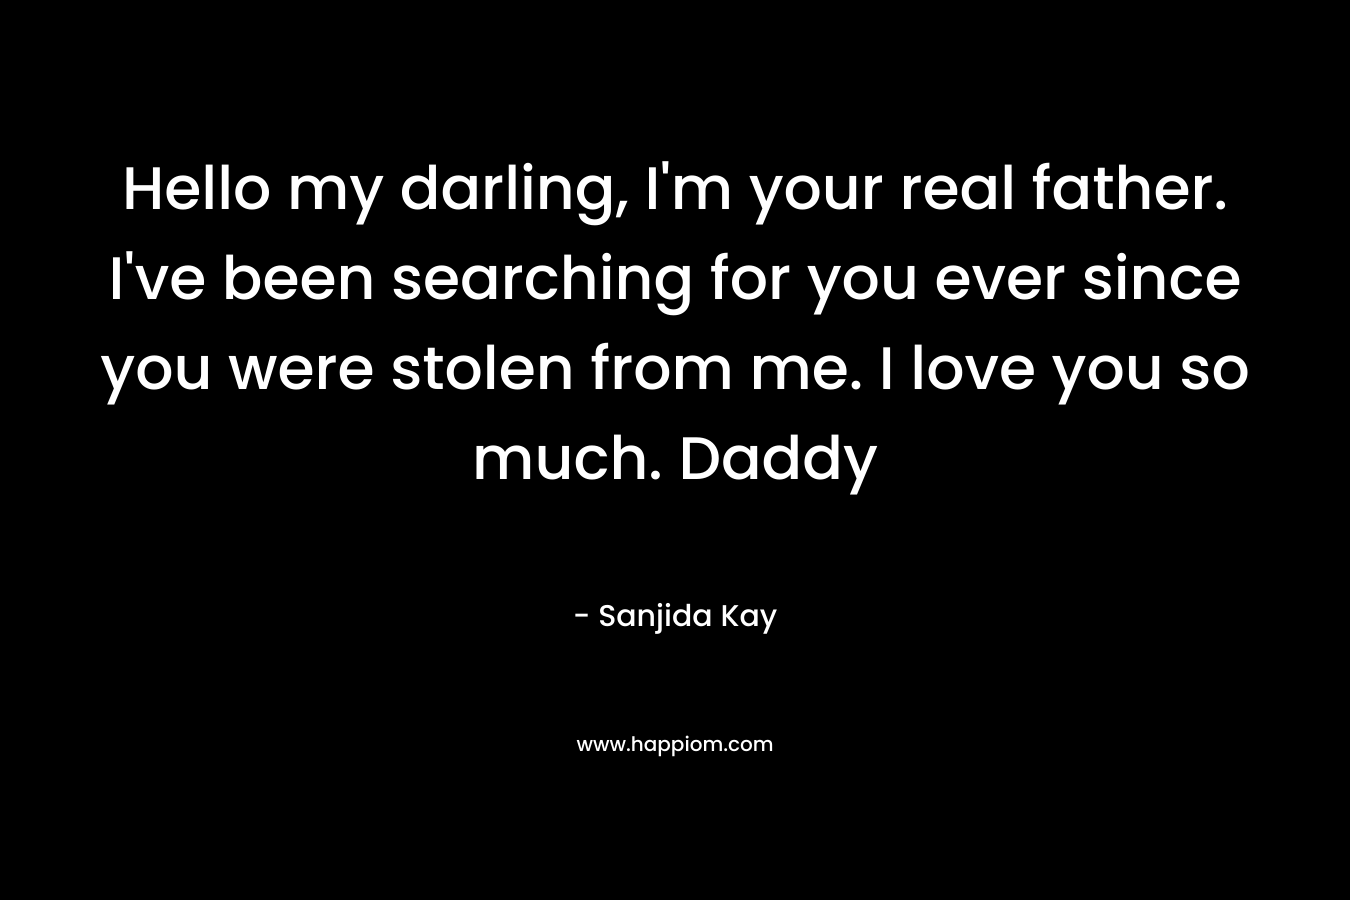 Hello my darling, I’m your real father. I’ve been searching for you ever since you were stolen from me. I love you so much. Daddy – Sanjida Kay